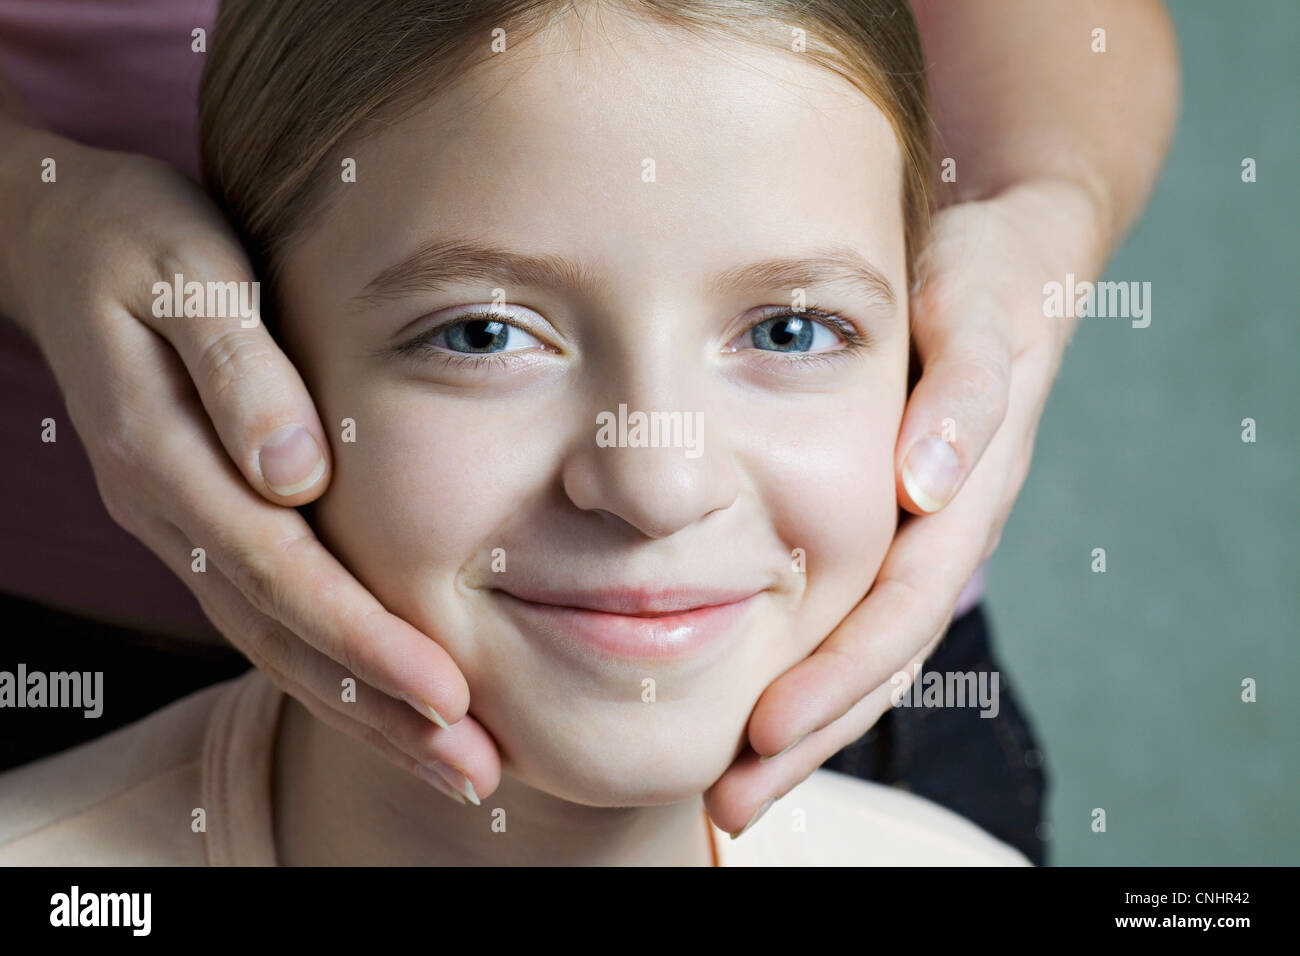 Portrait of daughter with Mother's hands on her cheeks Stock Photo